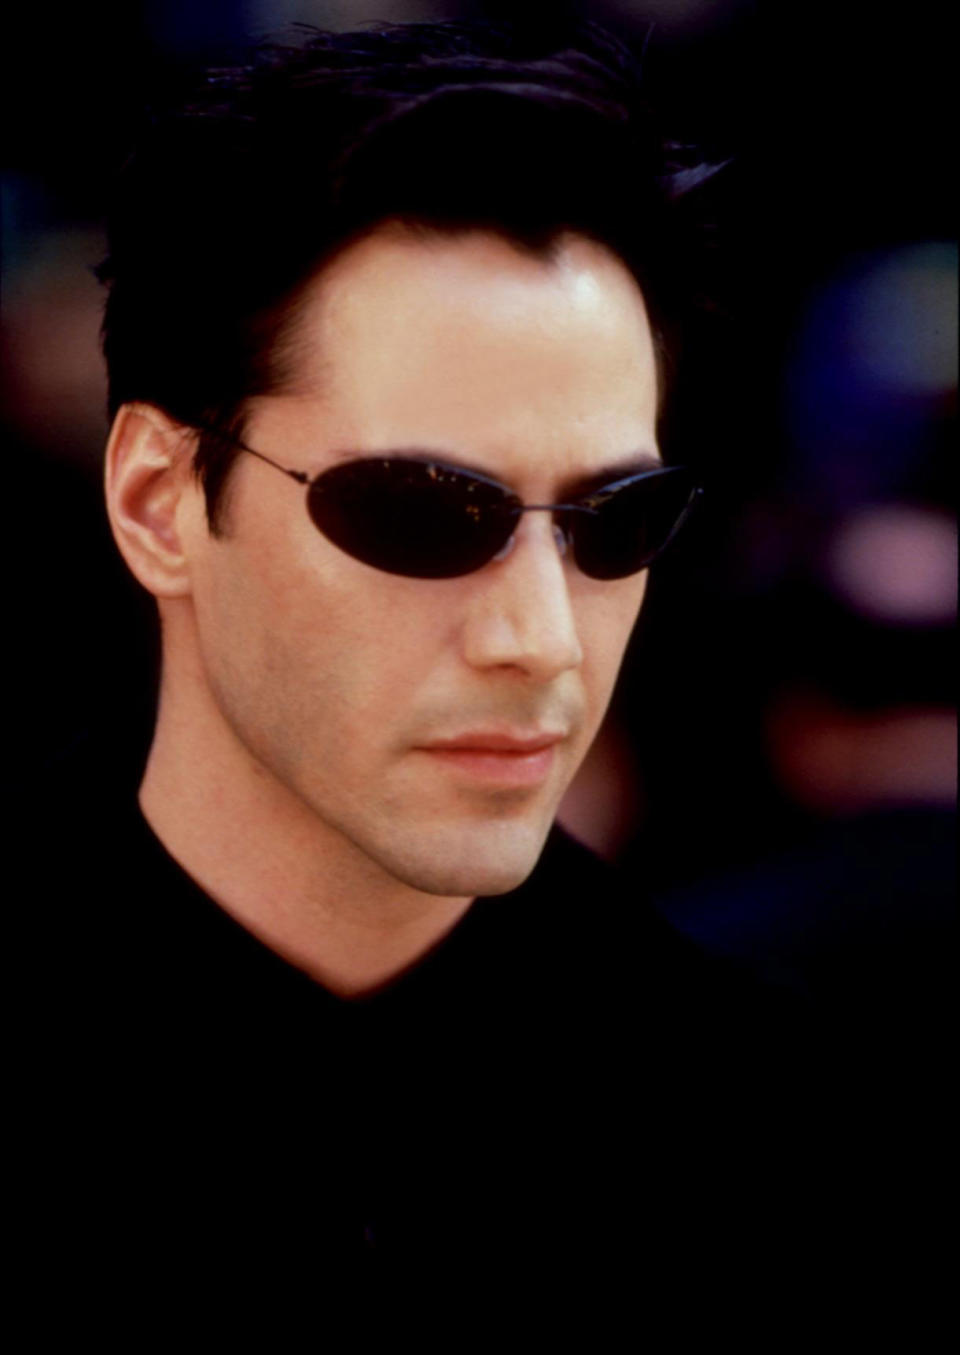 Close-up of Keanu Reeves wearing sunglasses